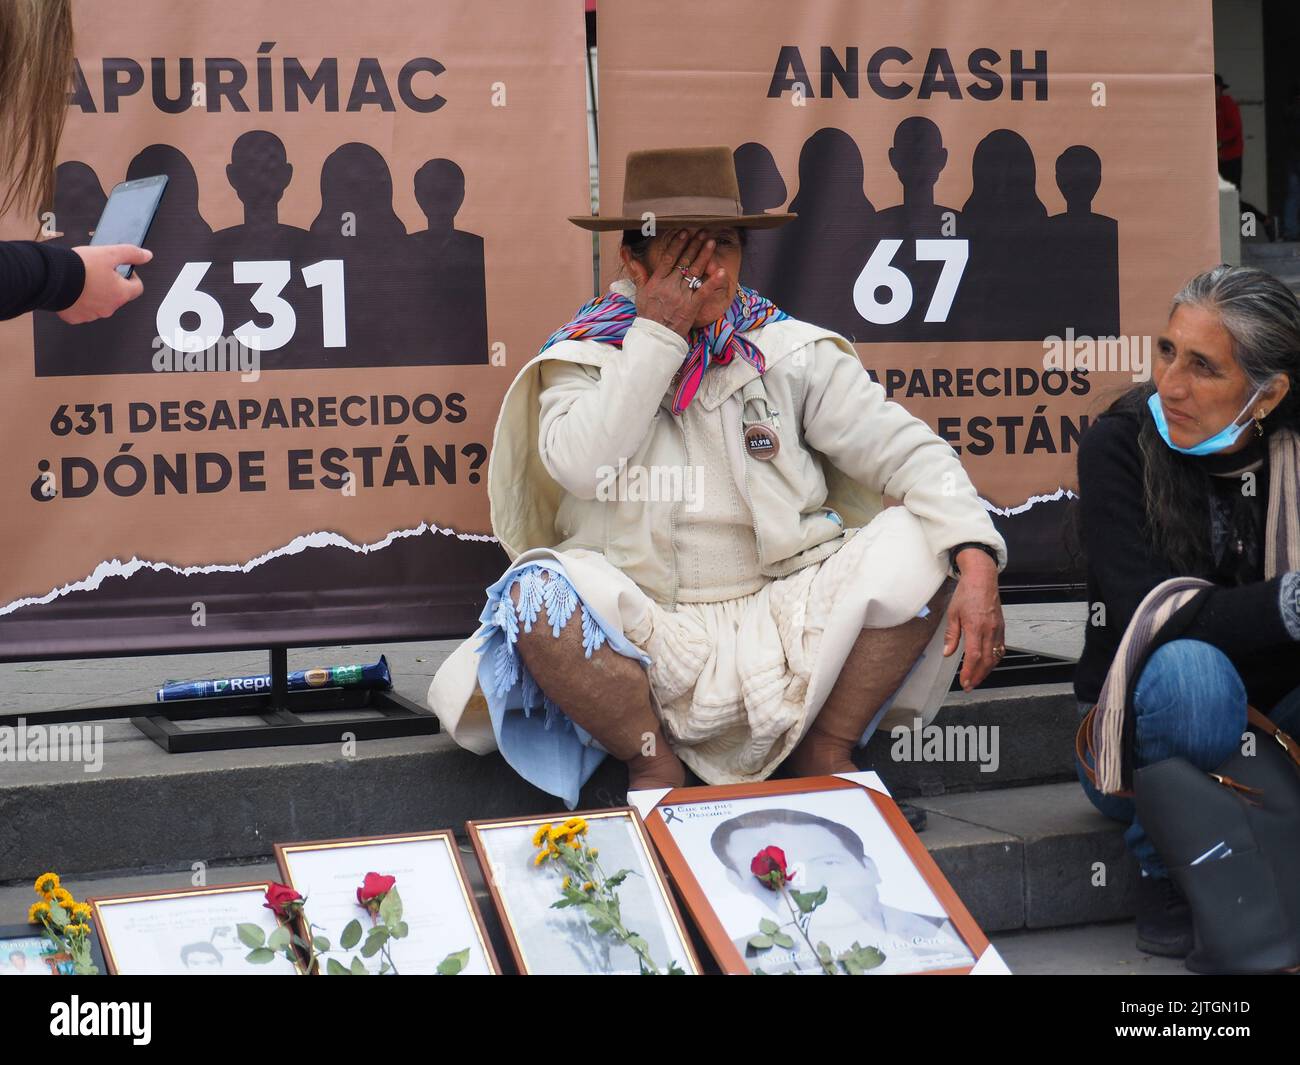 Peru, 30/08/2022, An indigenous woman cries next to the photo of a missing person when nineteen years after the presentation of the final report of the Truth and Reconciliation Commission (CVR), relatives of the victims of terrorism in Peru (1980 - 2000) took to the streets carrying photos and lists with the names of their missing relatives, demanding reparation from the state. The Truth Commission was a Peruvian organism mainly responsible for preparing a report on the Era of Terrorism in Peru, which indicates that there were more than 70,000 victims and some 20,000 disappeared as a result of Stock Photo